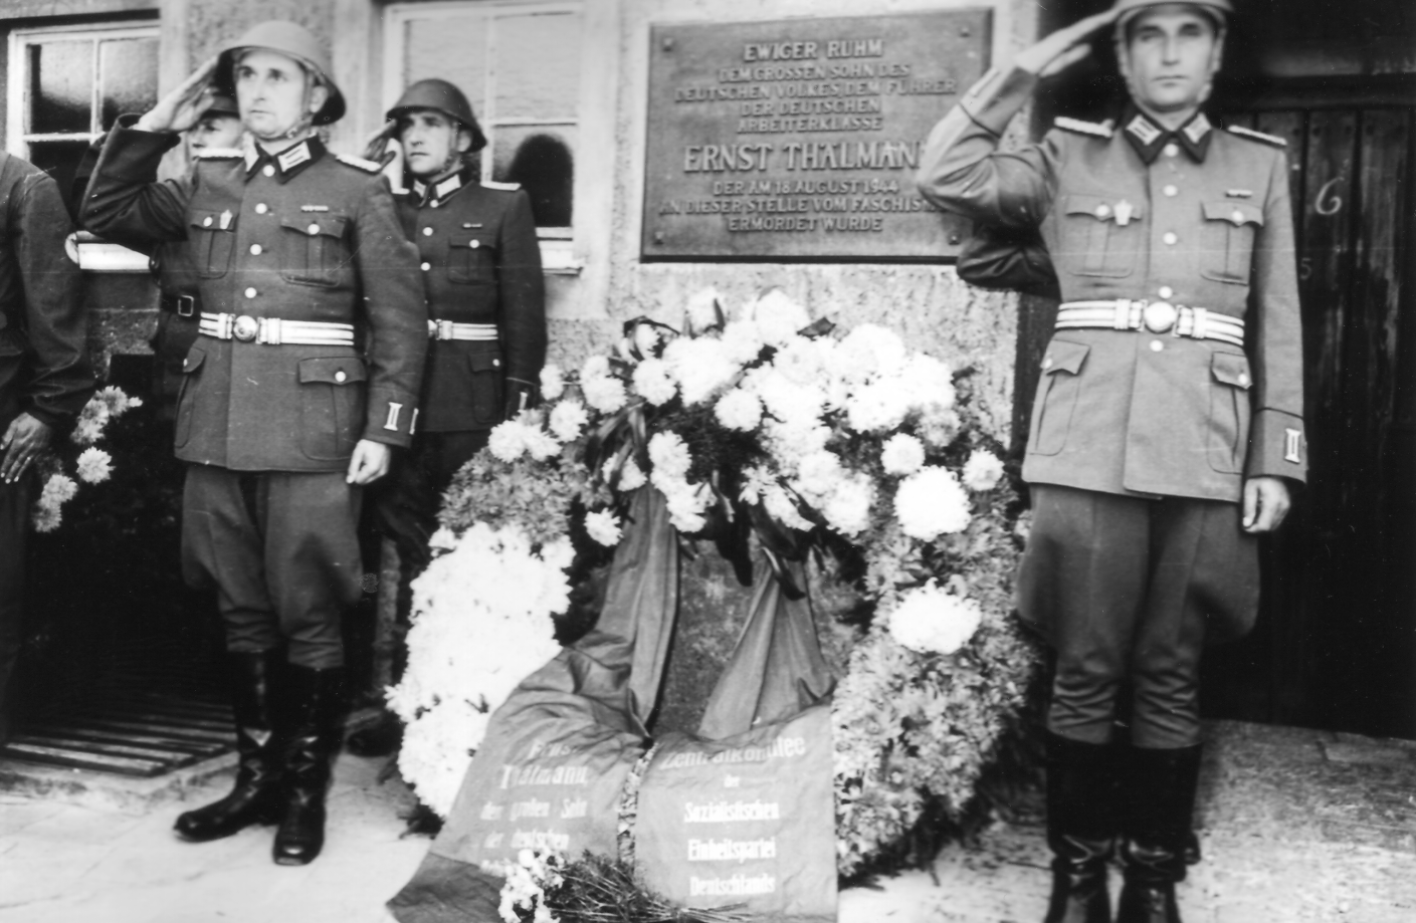 Three soldiers of the NVA salute around a wreath laid in front of the memorial plaque for Ernst Thälmann